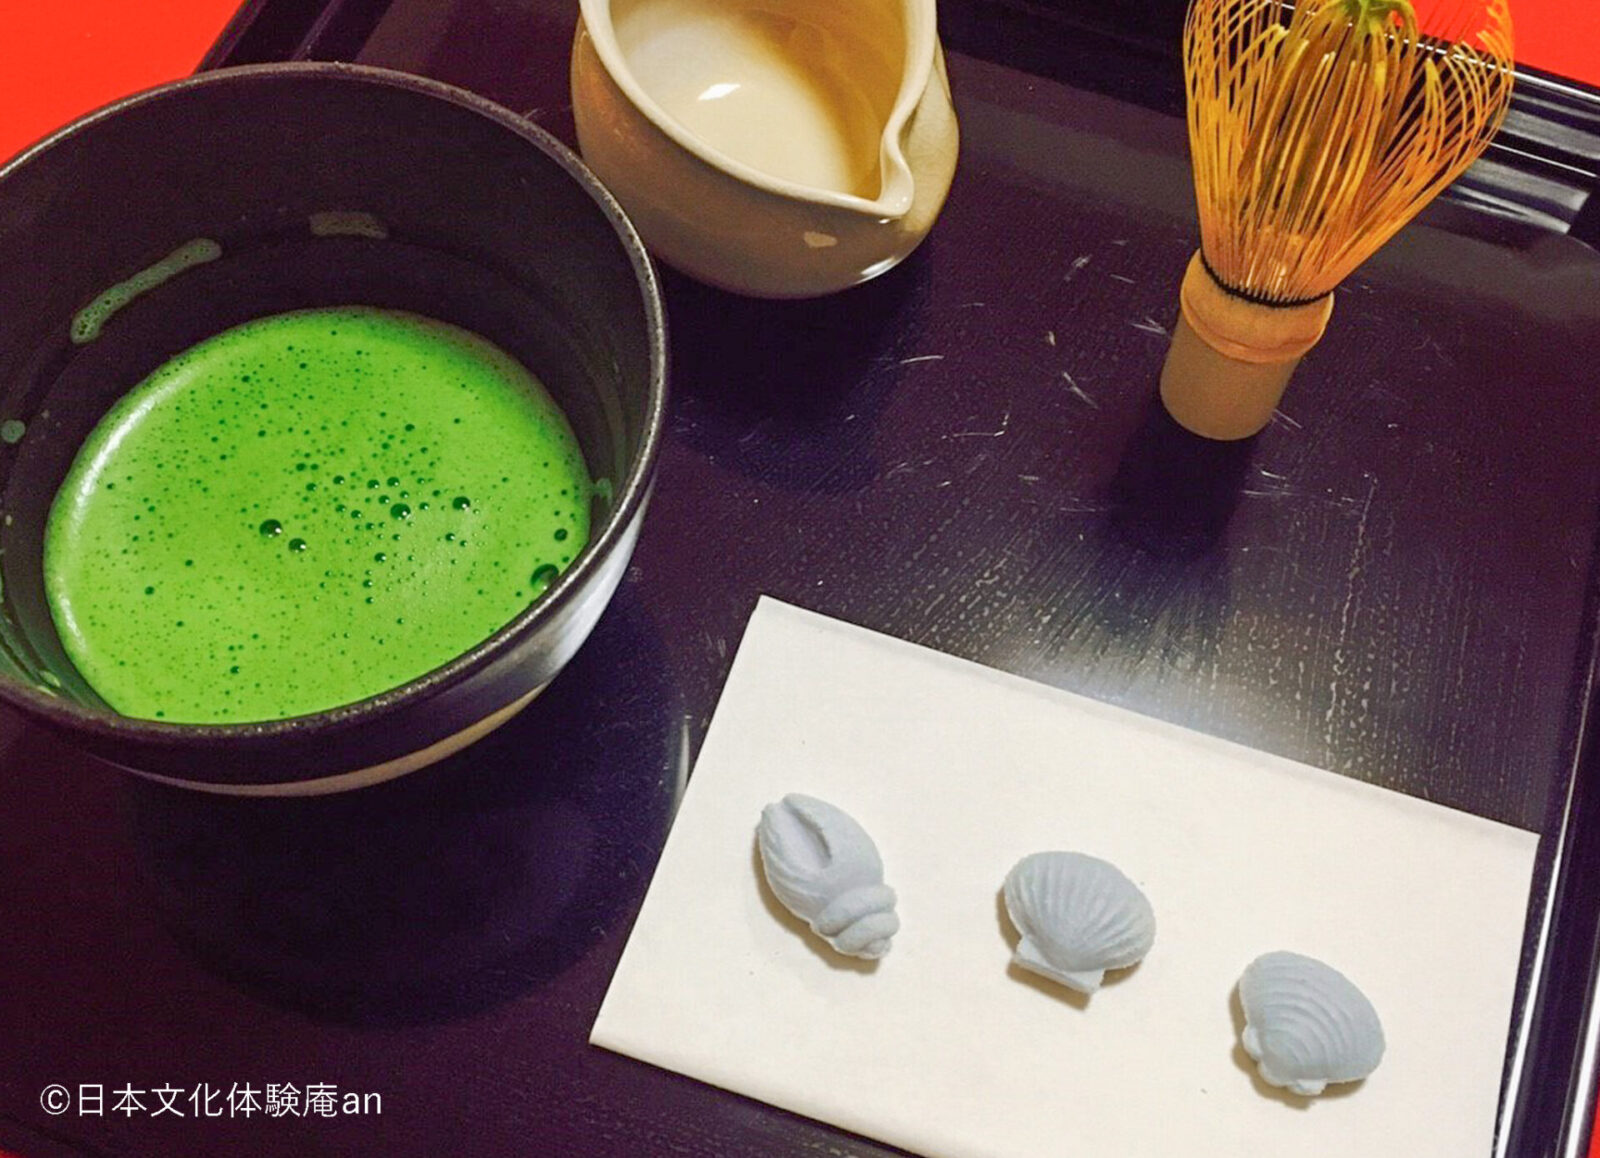 2 Types of Japanese Sweets making and Tea Ceremony (3 kinds of experiences)